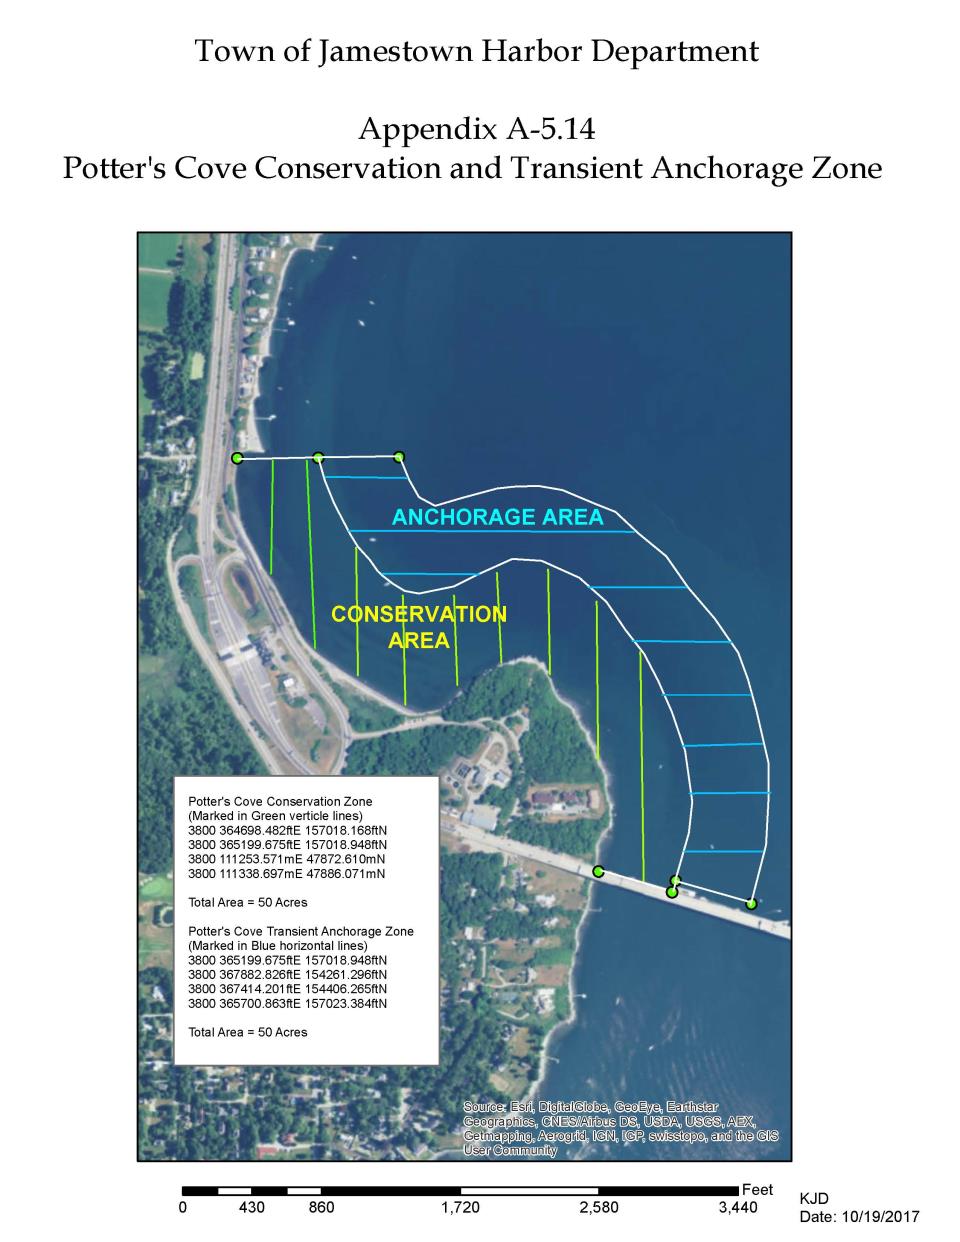 Potter's Cove Anchoring and Conservation Areas